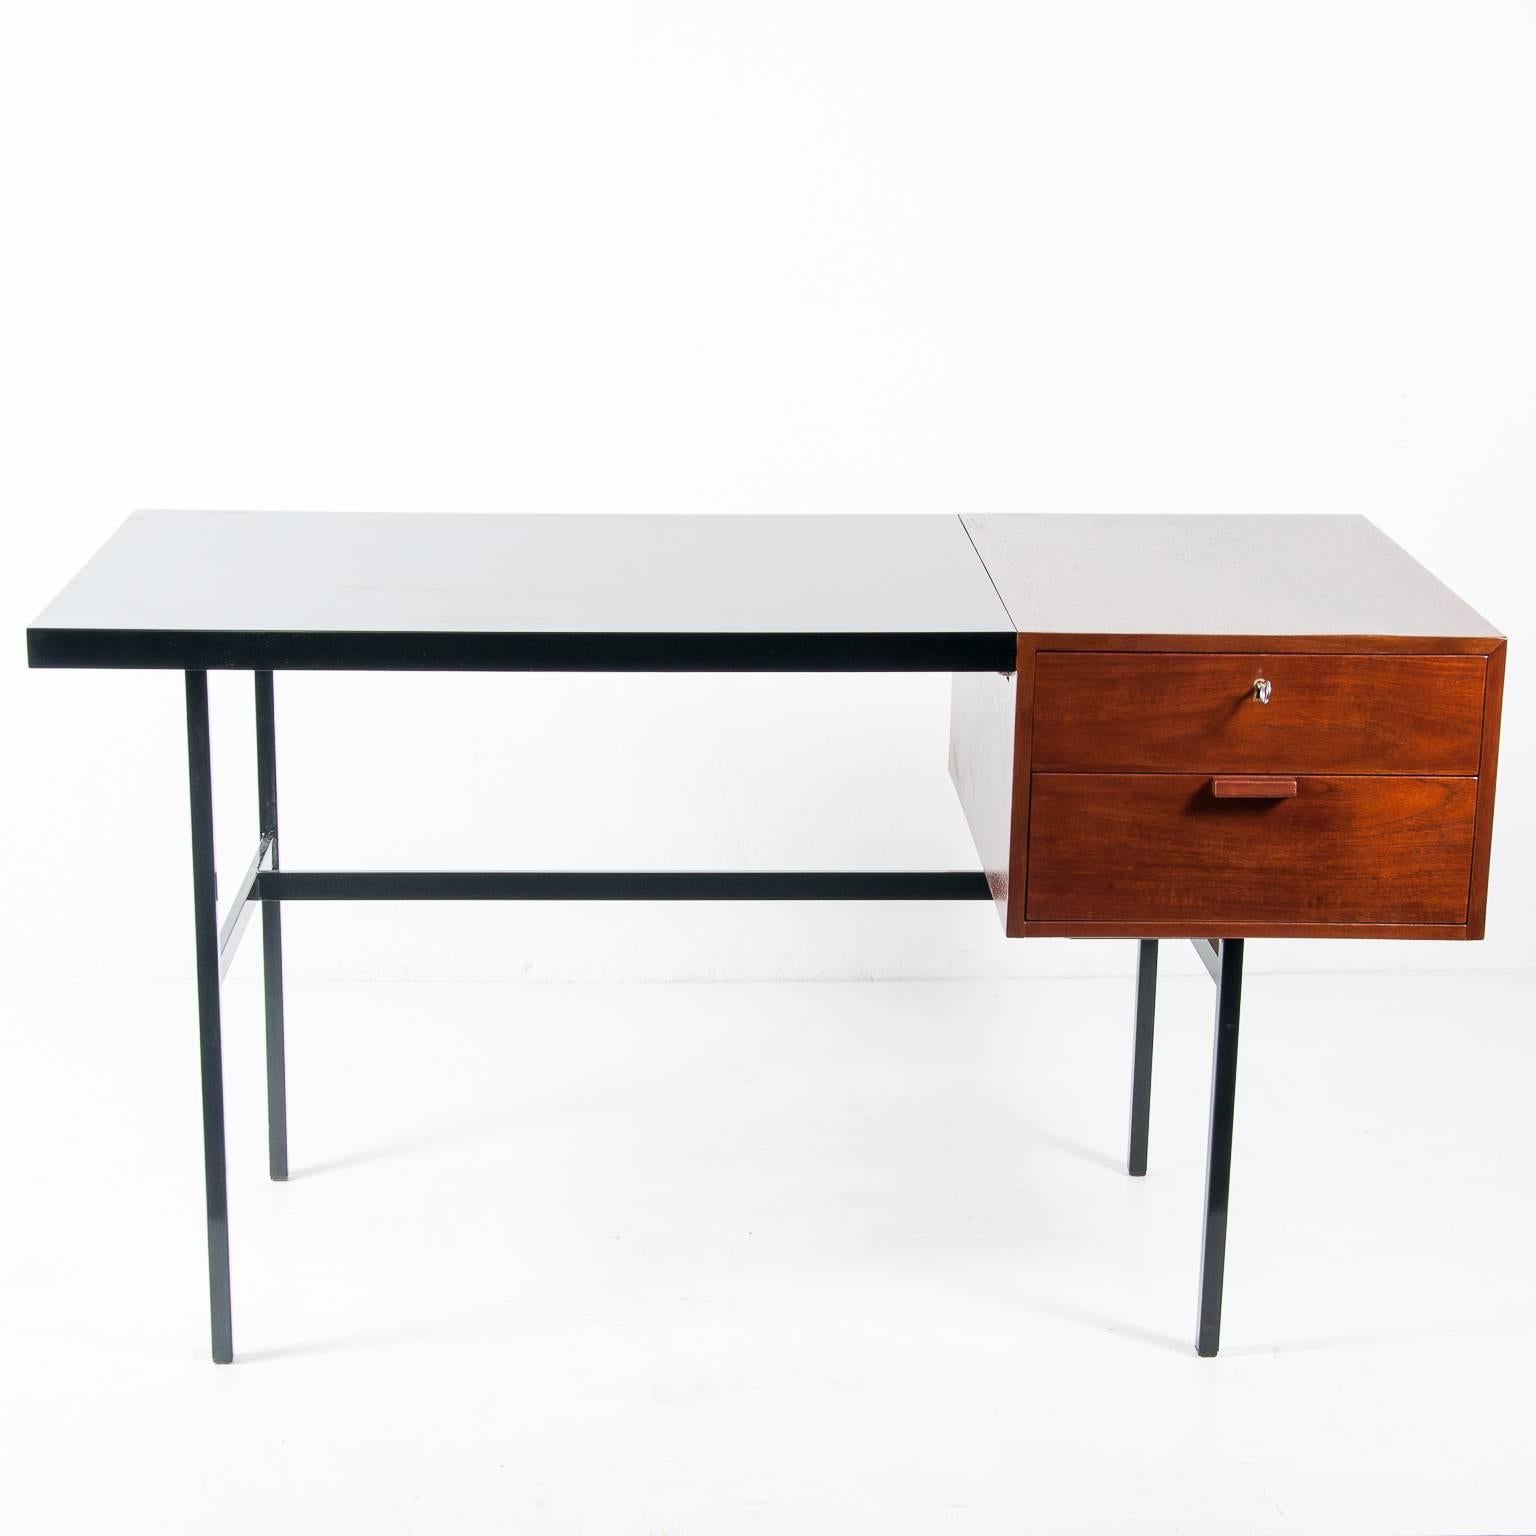 Designed by Pierre Paulin, circa 1930. 
In the style of the Bauhaus era.
Manufactured by Thonet. Lable under the tabletop.
Walnut chest and drawers, black lacquered tabletop.
Black lacquered steel frame. 
Perfect condition. 
A very rare to find